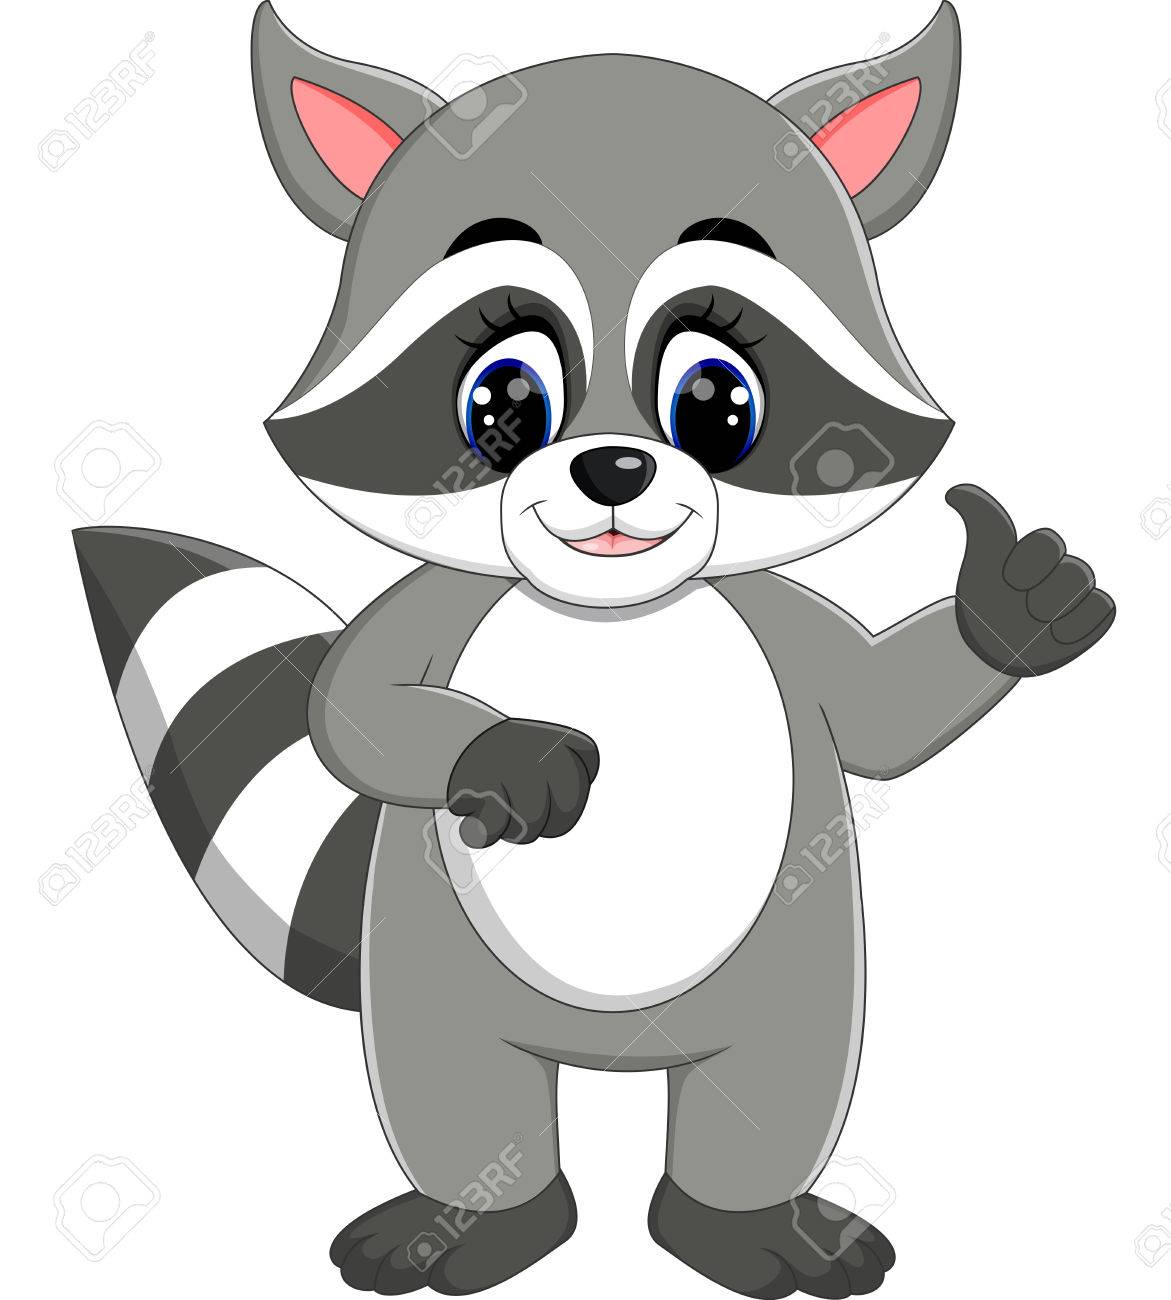 Free download best on. Racoon clipart mapache